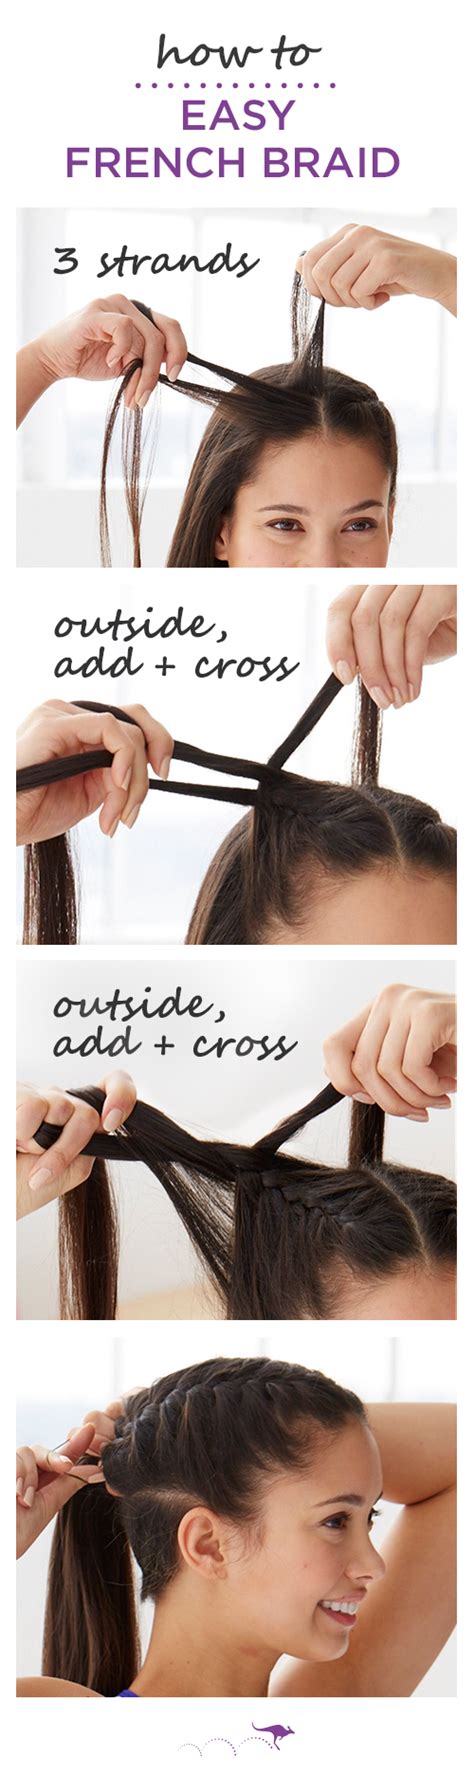 When you come up with making a simple braid, you will surely want to know more about braids. How To: Easy French Braid | Keep hair out of your face at ...